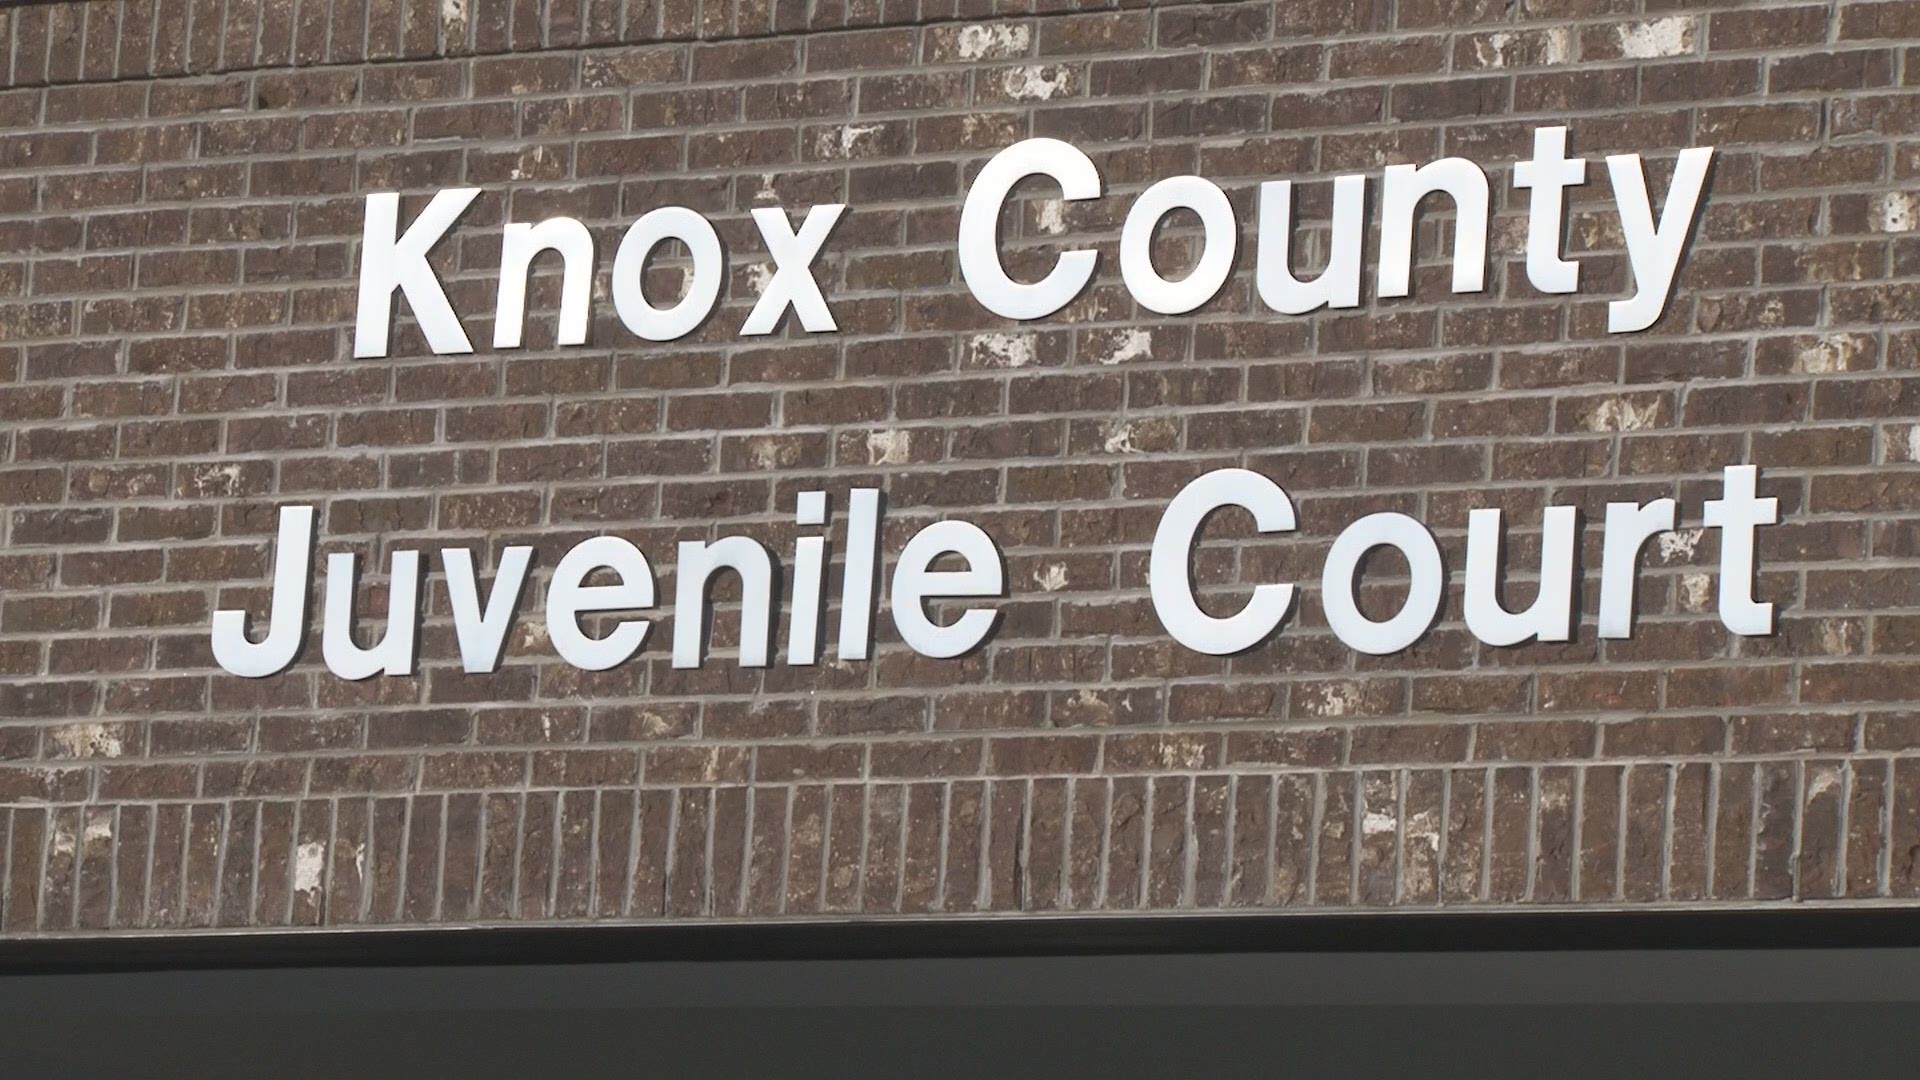 Knox County Juvenile Court #39 s stuffed animal supply replenished one week